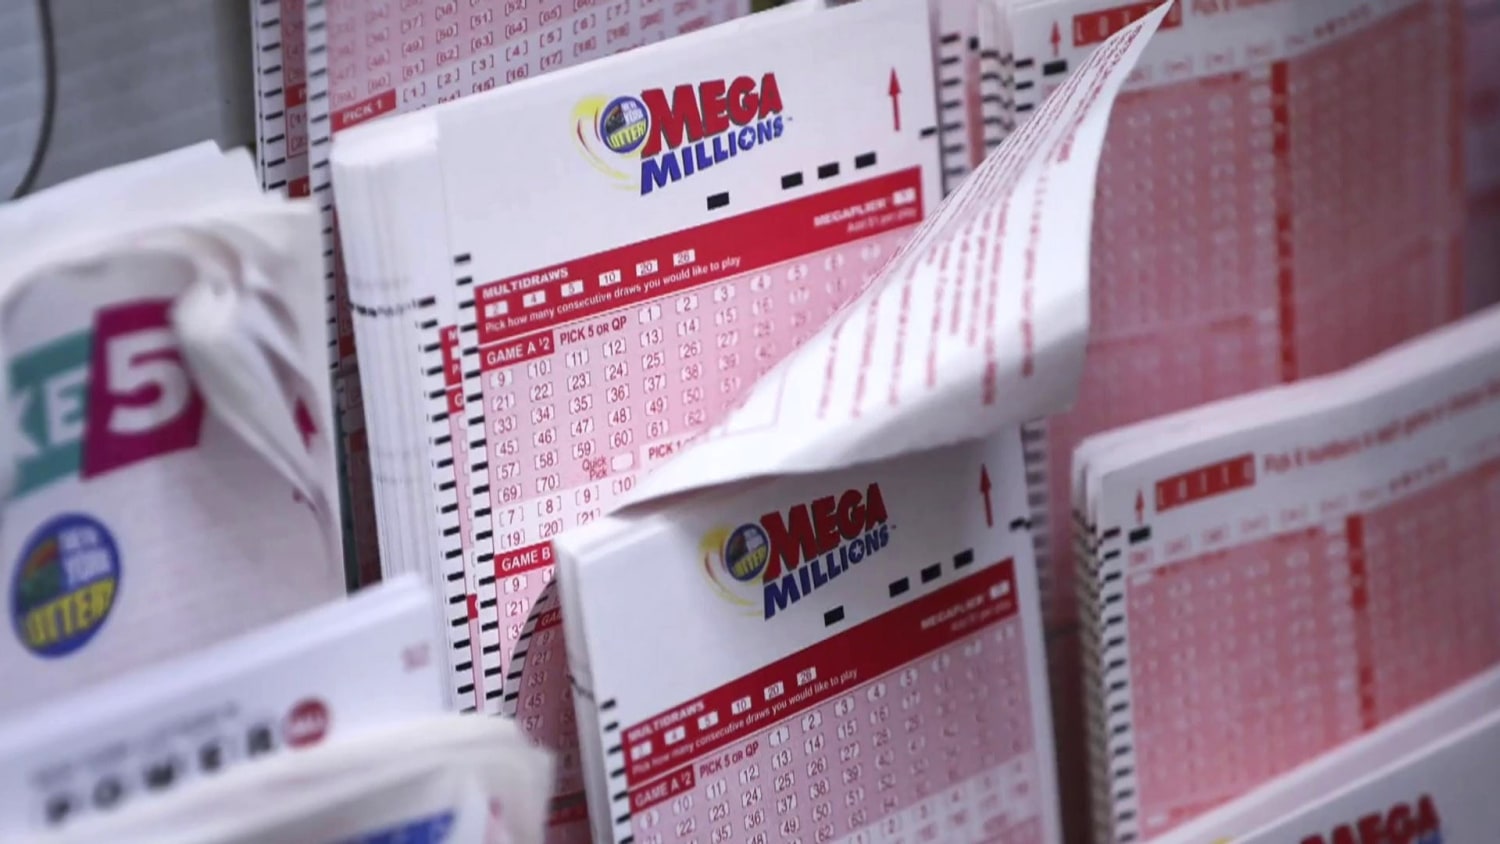 Mega Millions jackpot rises to $1.25 billion: How can I win it? Tips, odds…  - AS USA